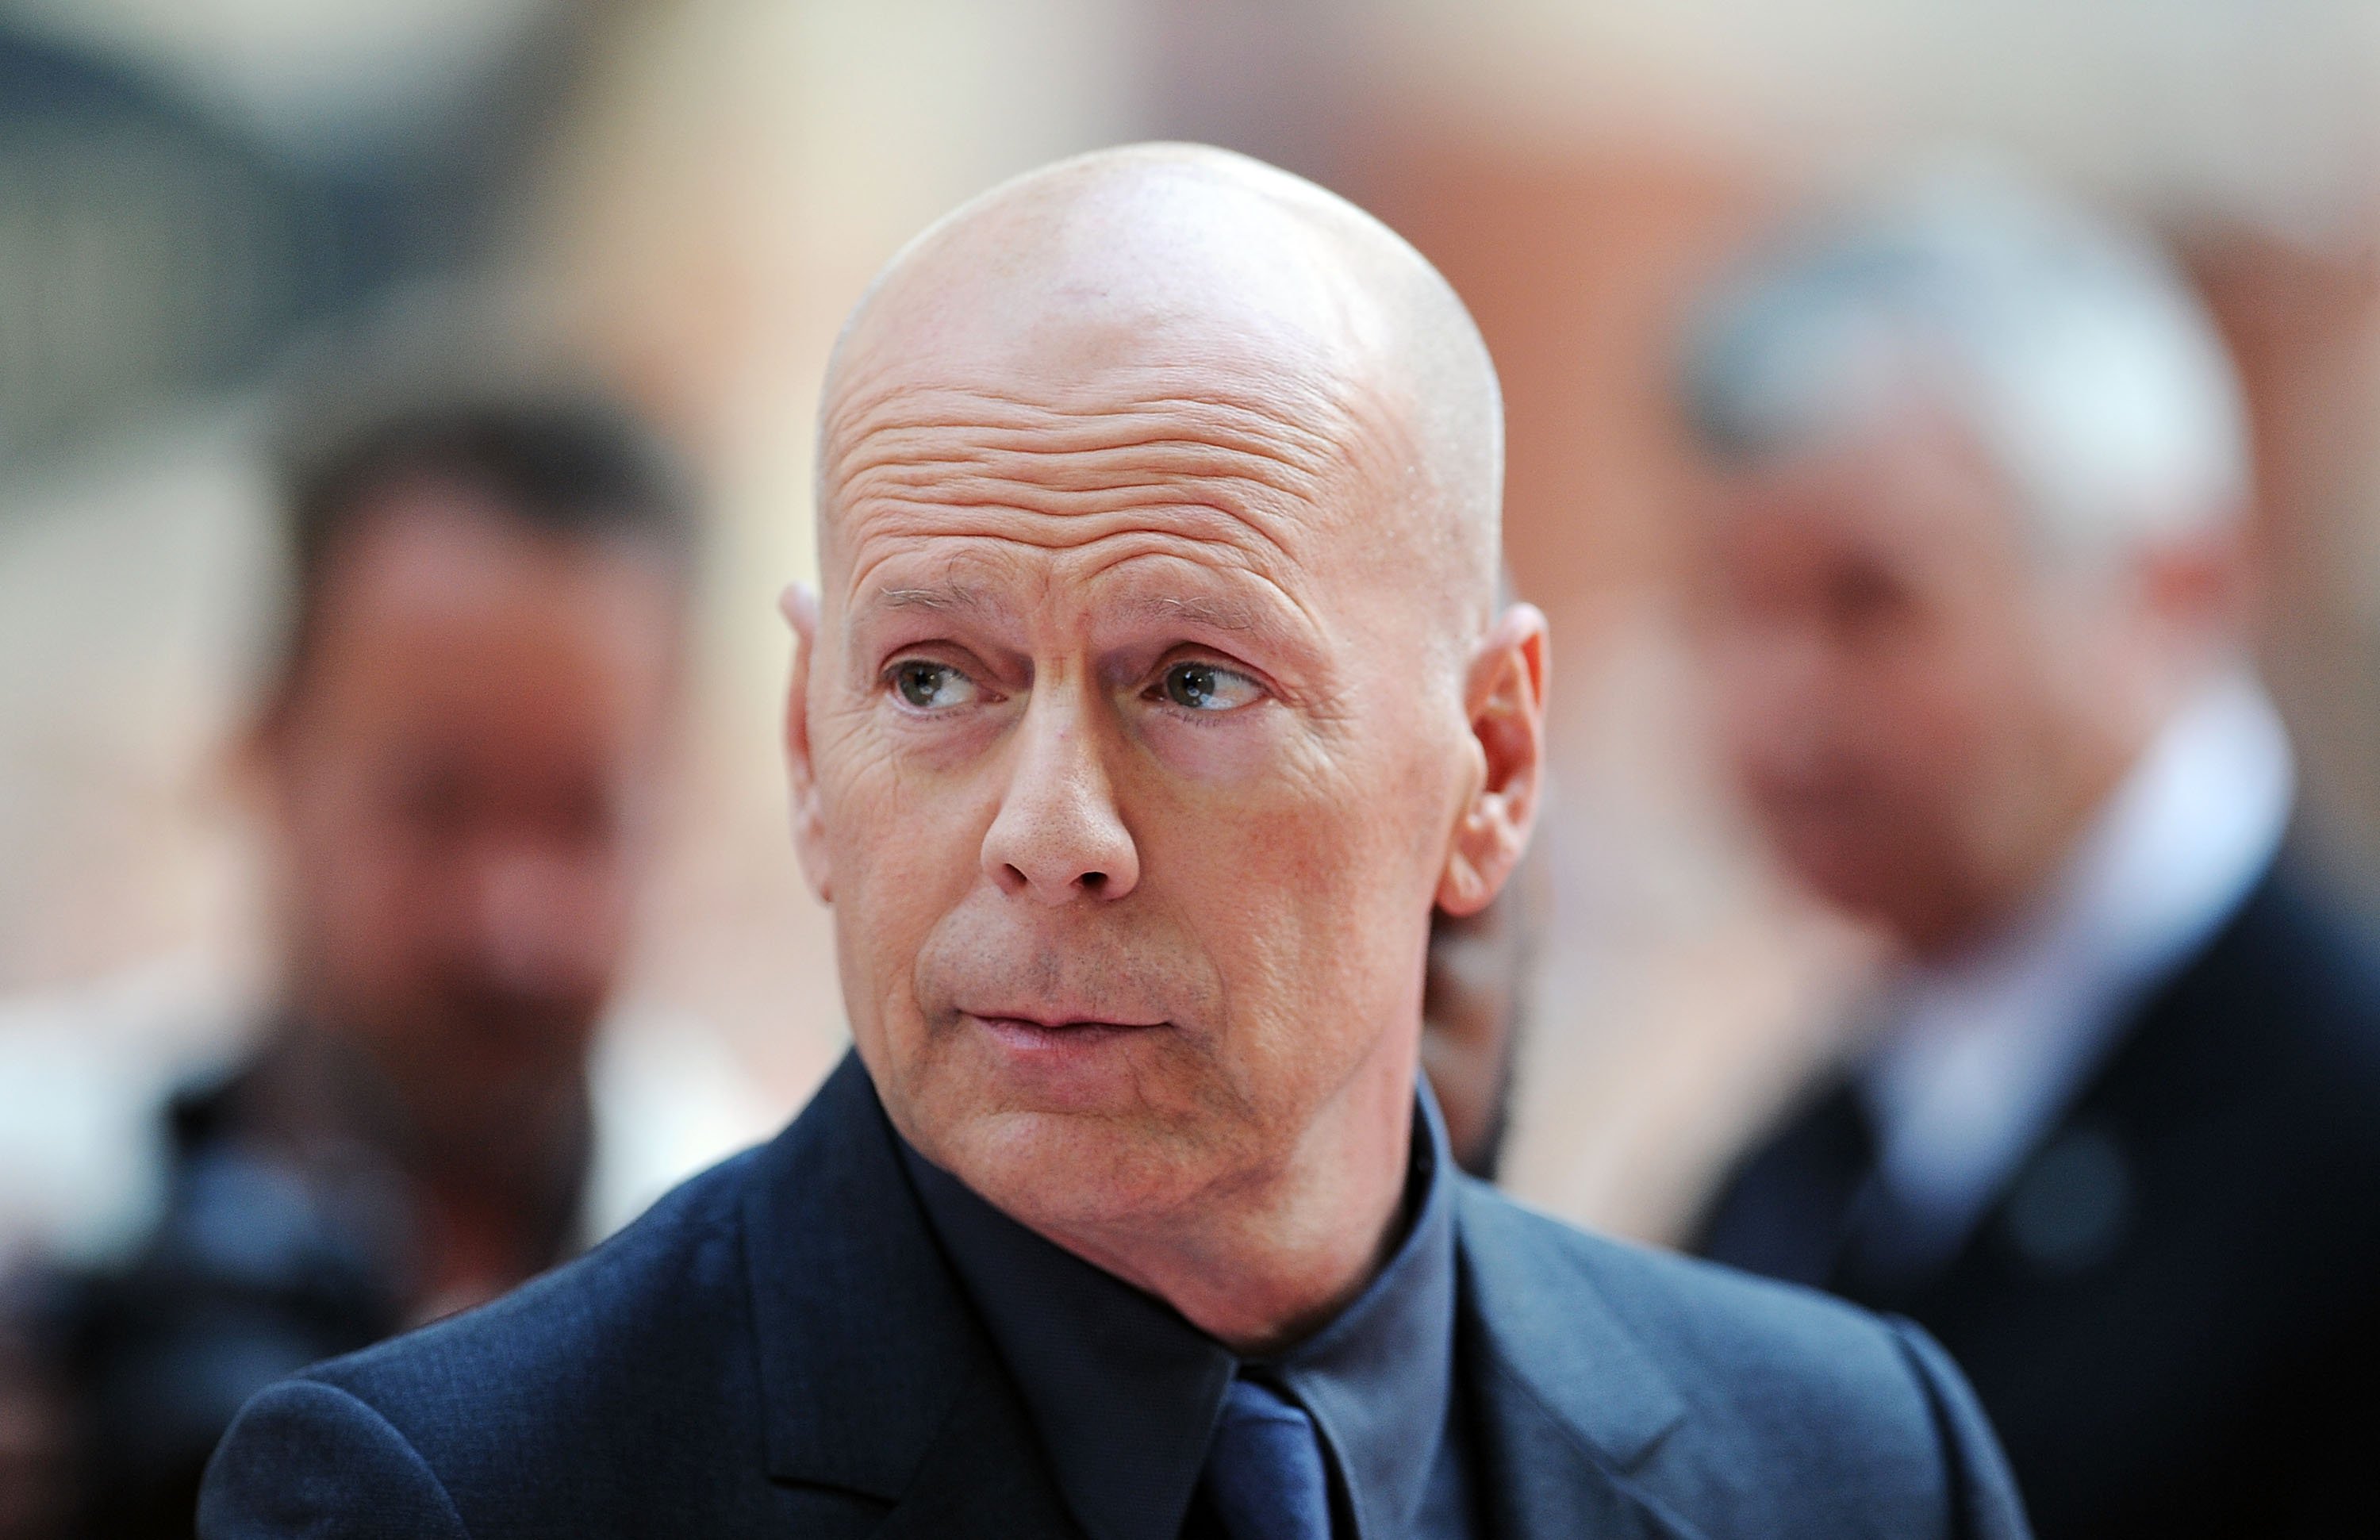 Bruce Willis attends the European Premiere of 'Red 2' on July 22, 2013, in London, England. | Source: Getty Images.